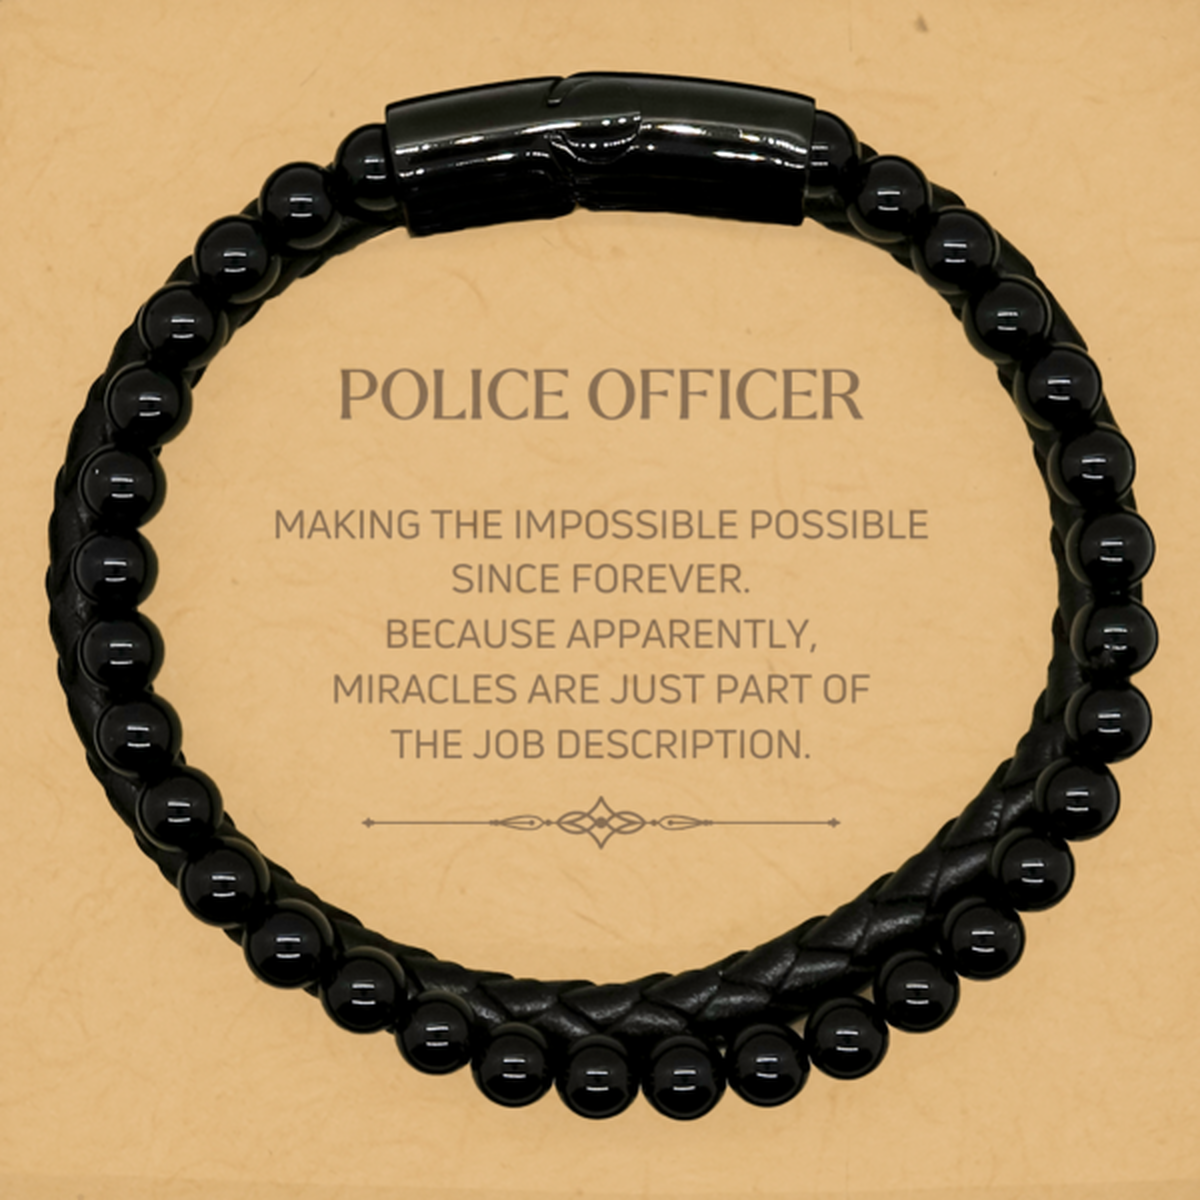 Funny Police Officer Gifts, Miracles are just part of the job description, Inspirational Birthday Stone Leather Bracelets For Police Officer, Men, Women, Coworkers, Friends, Boss